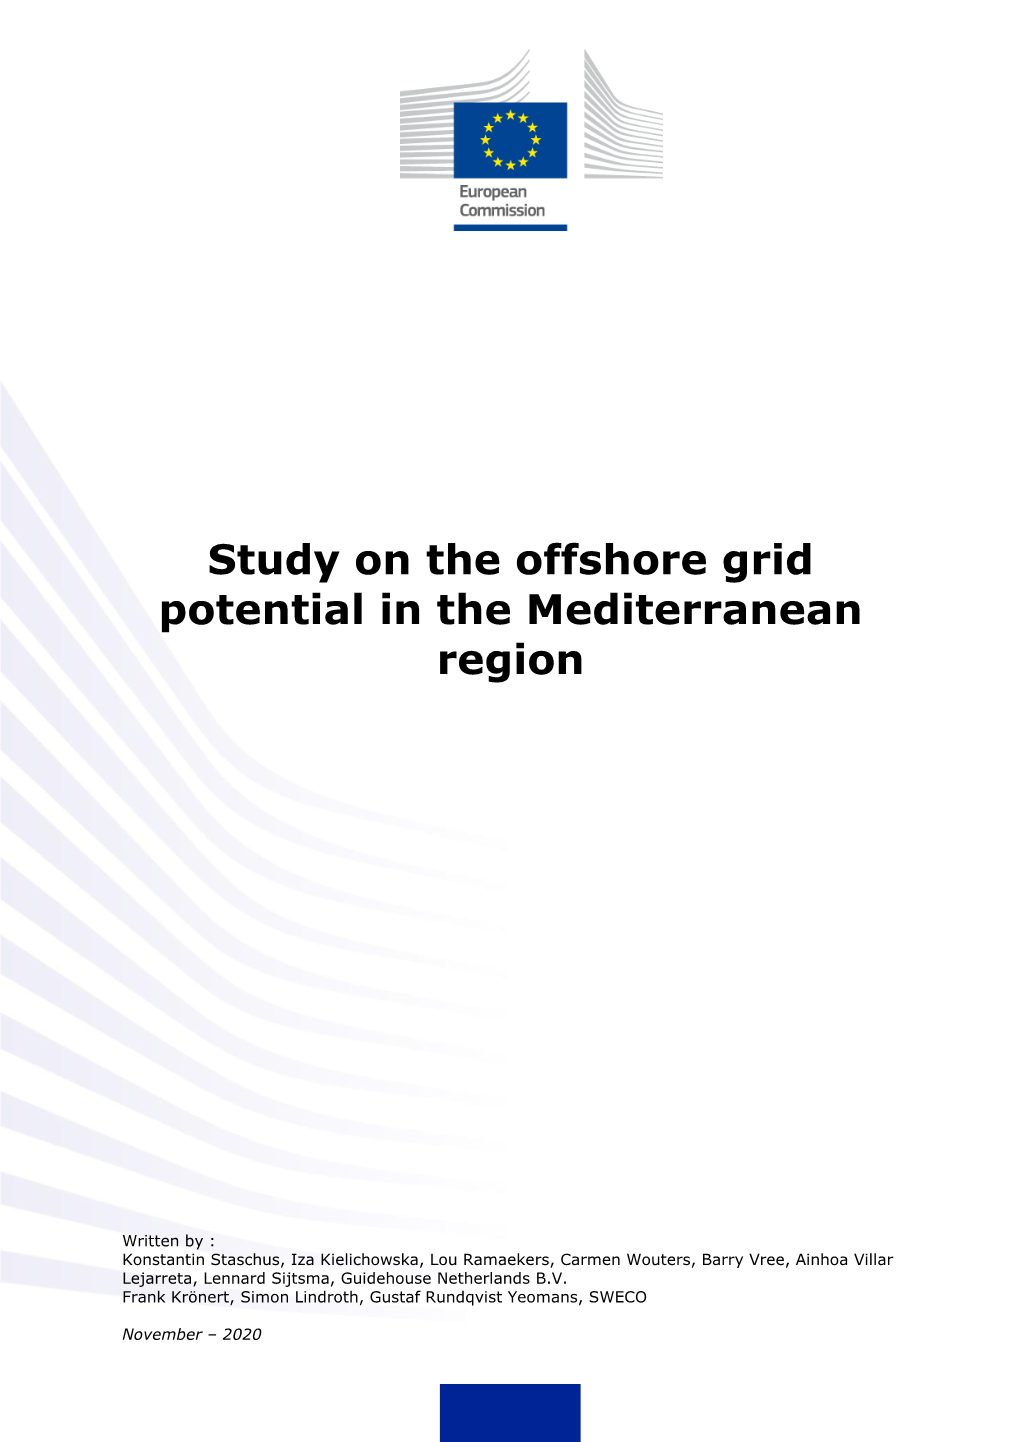 Study on the Offshore Grid Potential in the Mediterranean Region